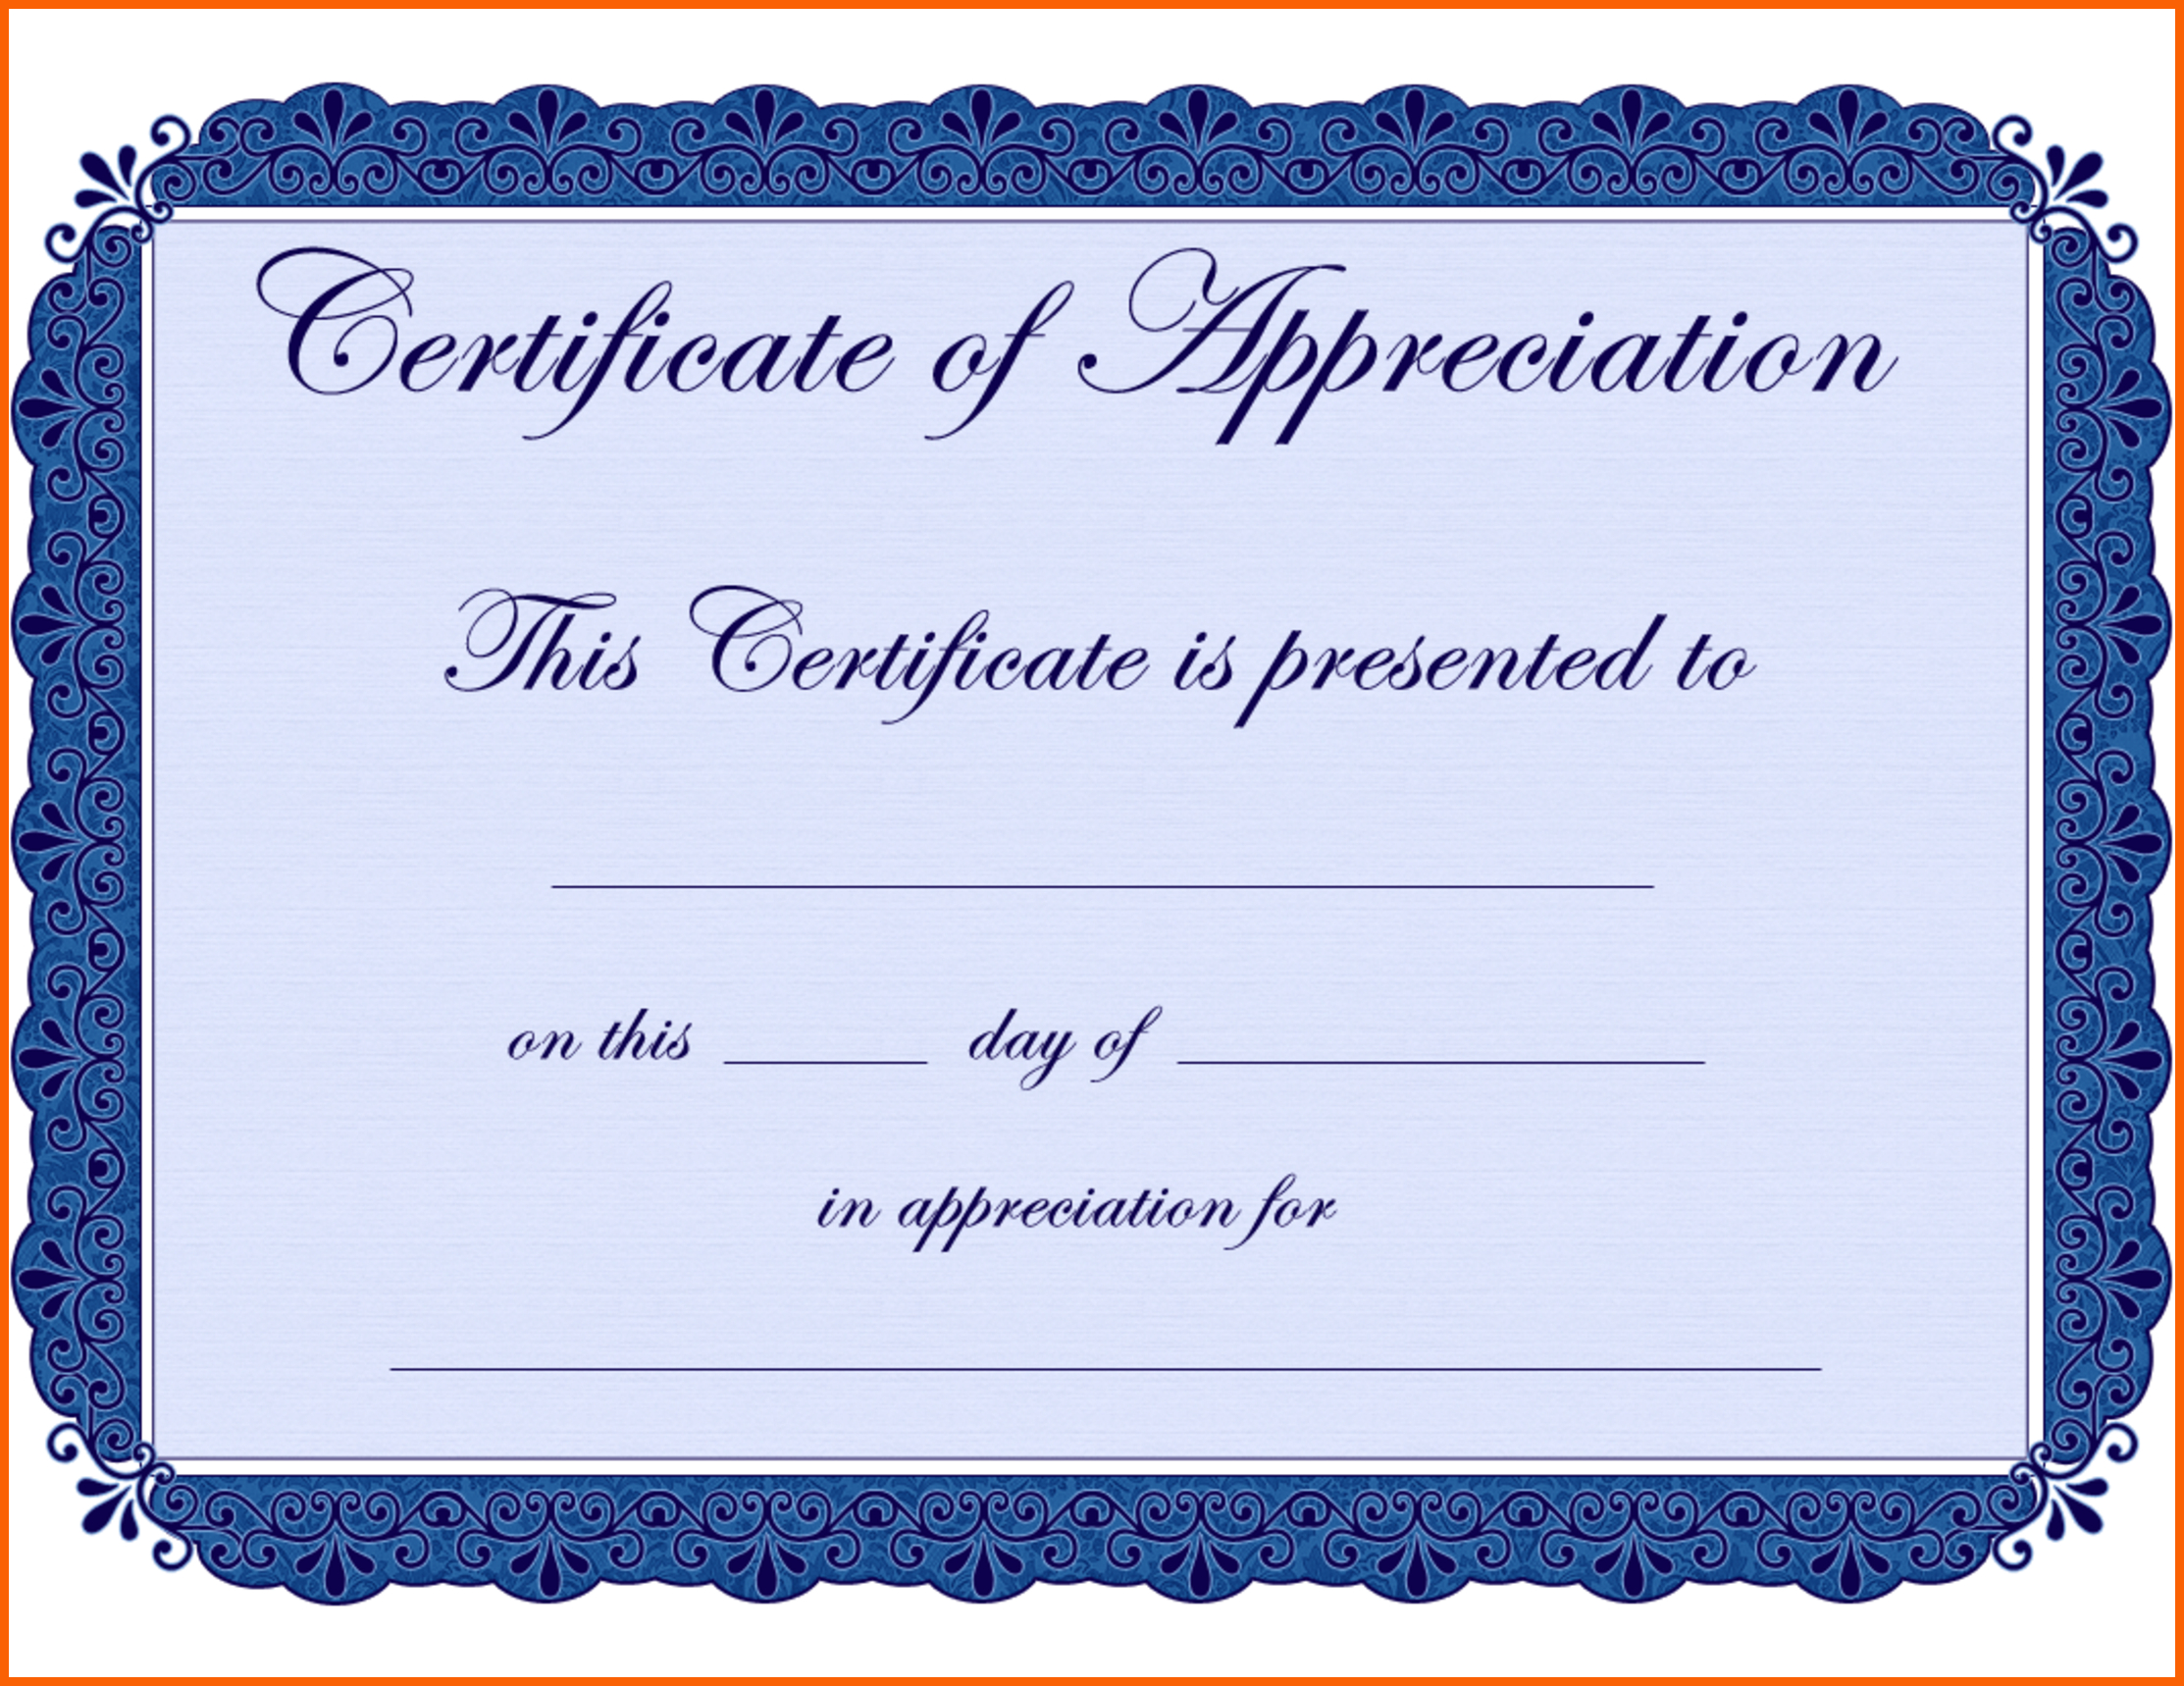 8+ Free Appreciation Certificate Templates For Word | Ml Datos Intended For Player Of The Day Certificate Template